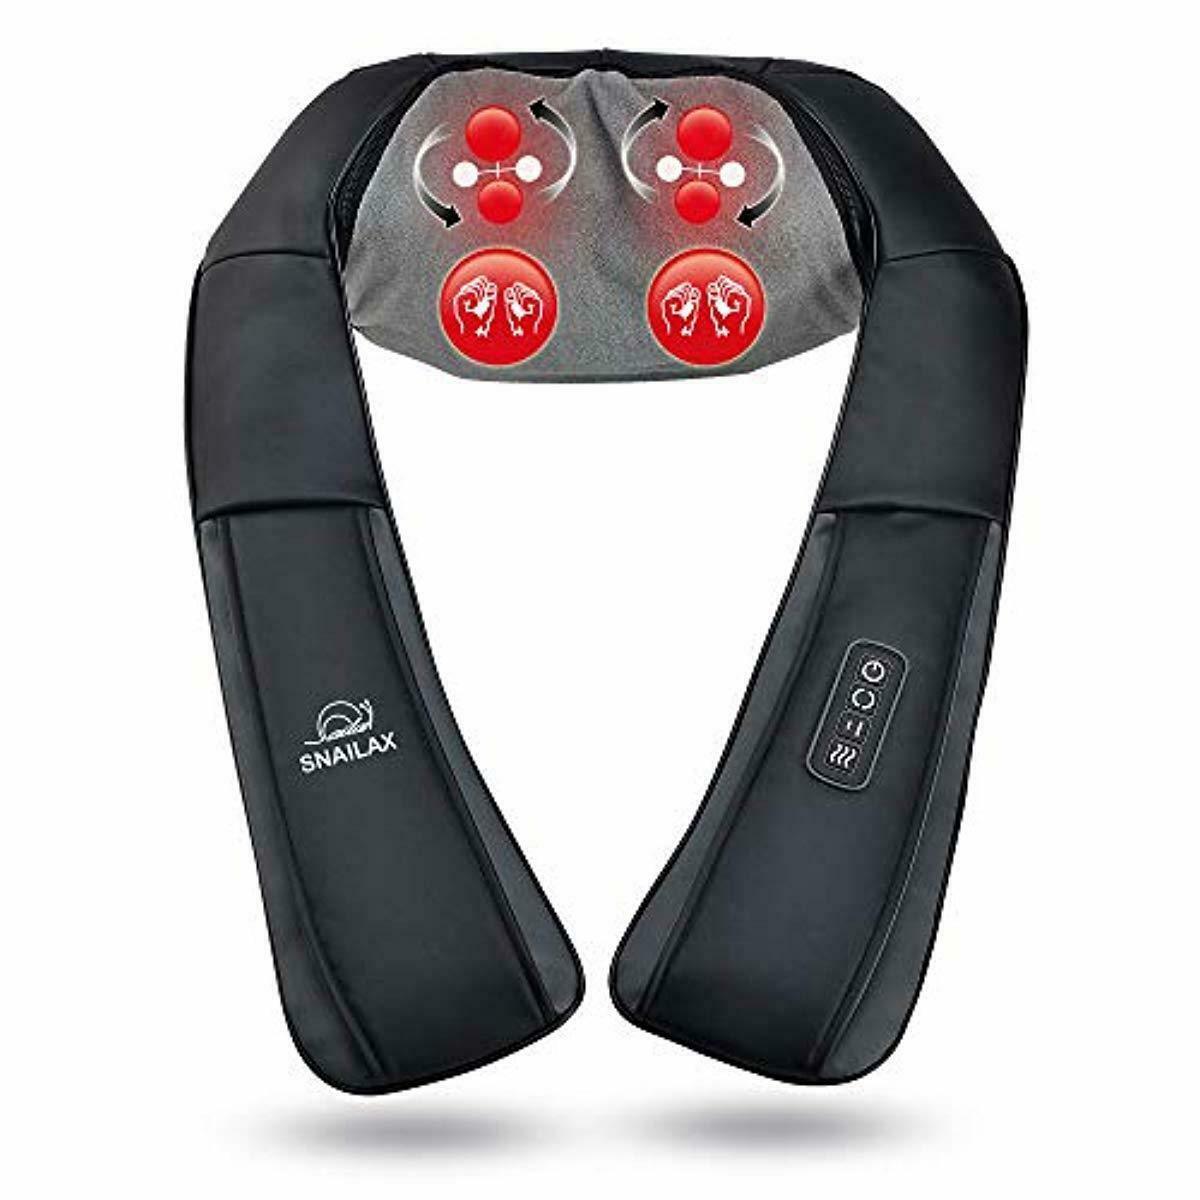 Snailax Shiatsu Percussion Neck And Shoulder Massager With Heat Deep Kneading Massagers